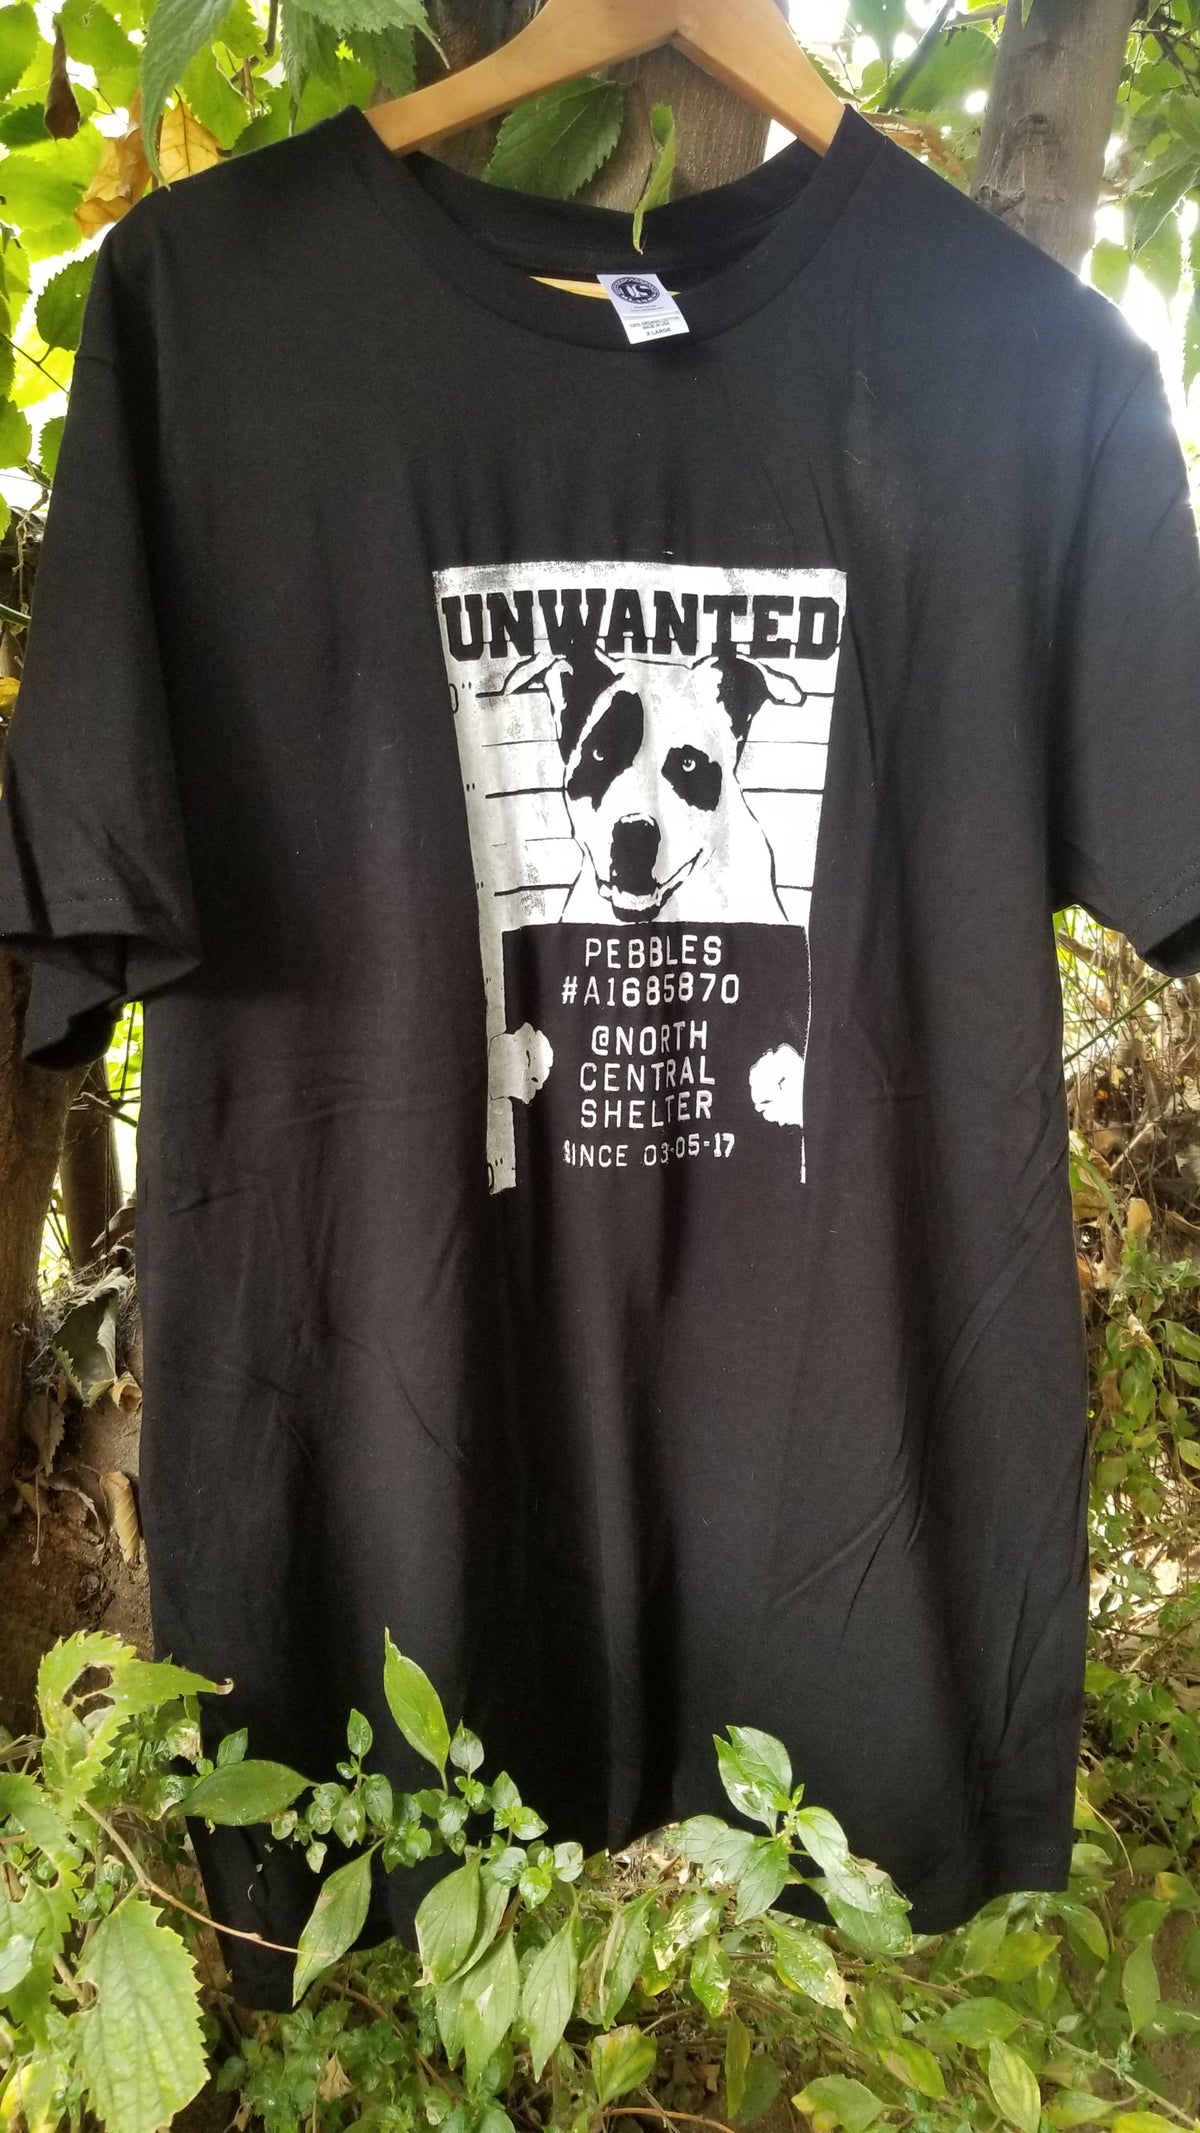 Pebbles - Unwanted Dog T-shirt - Found a Home!